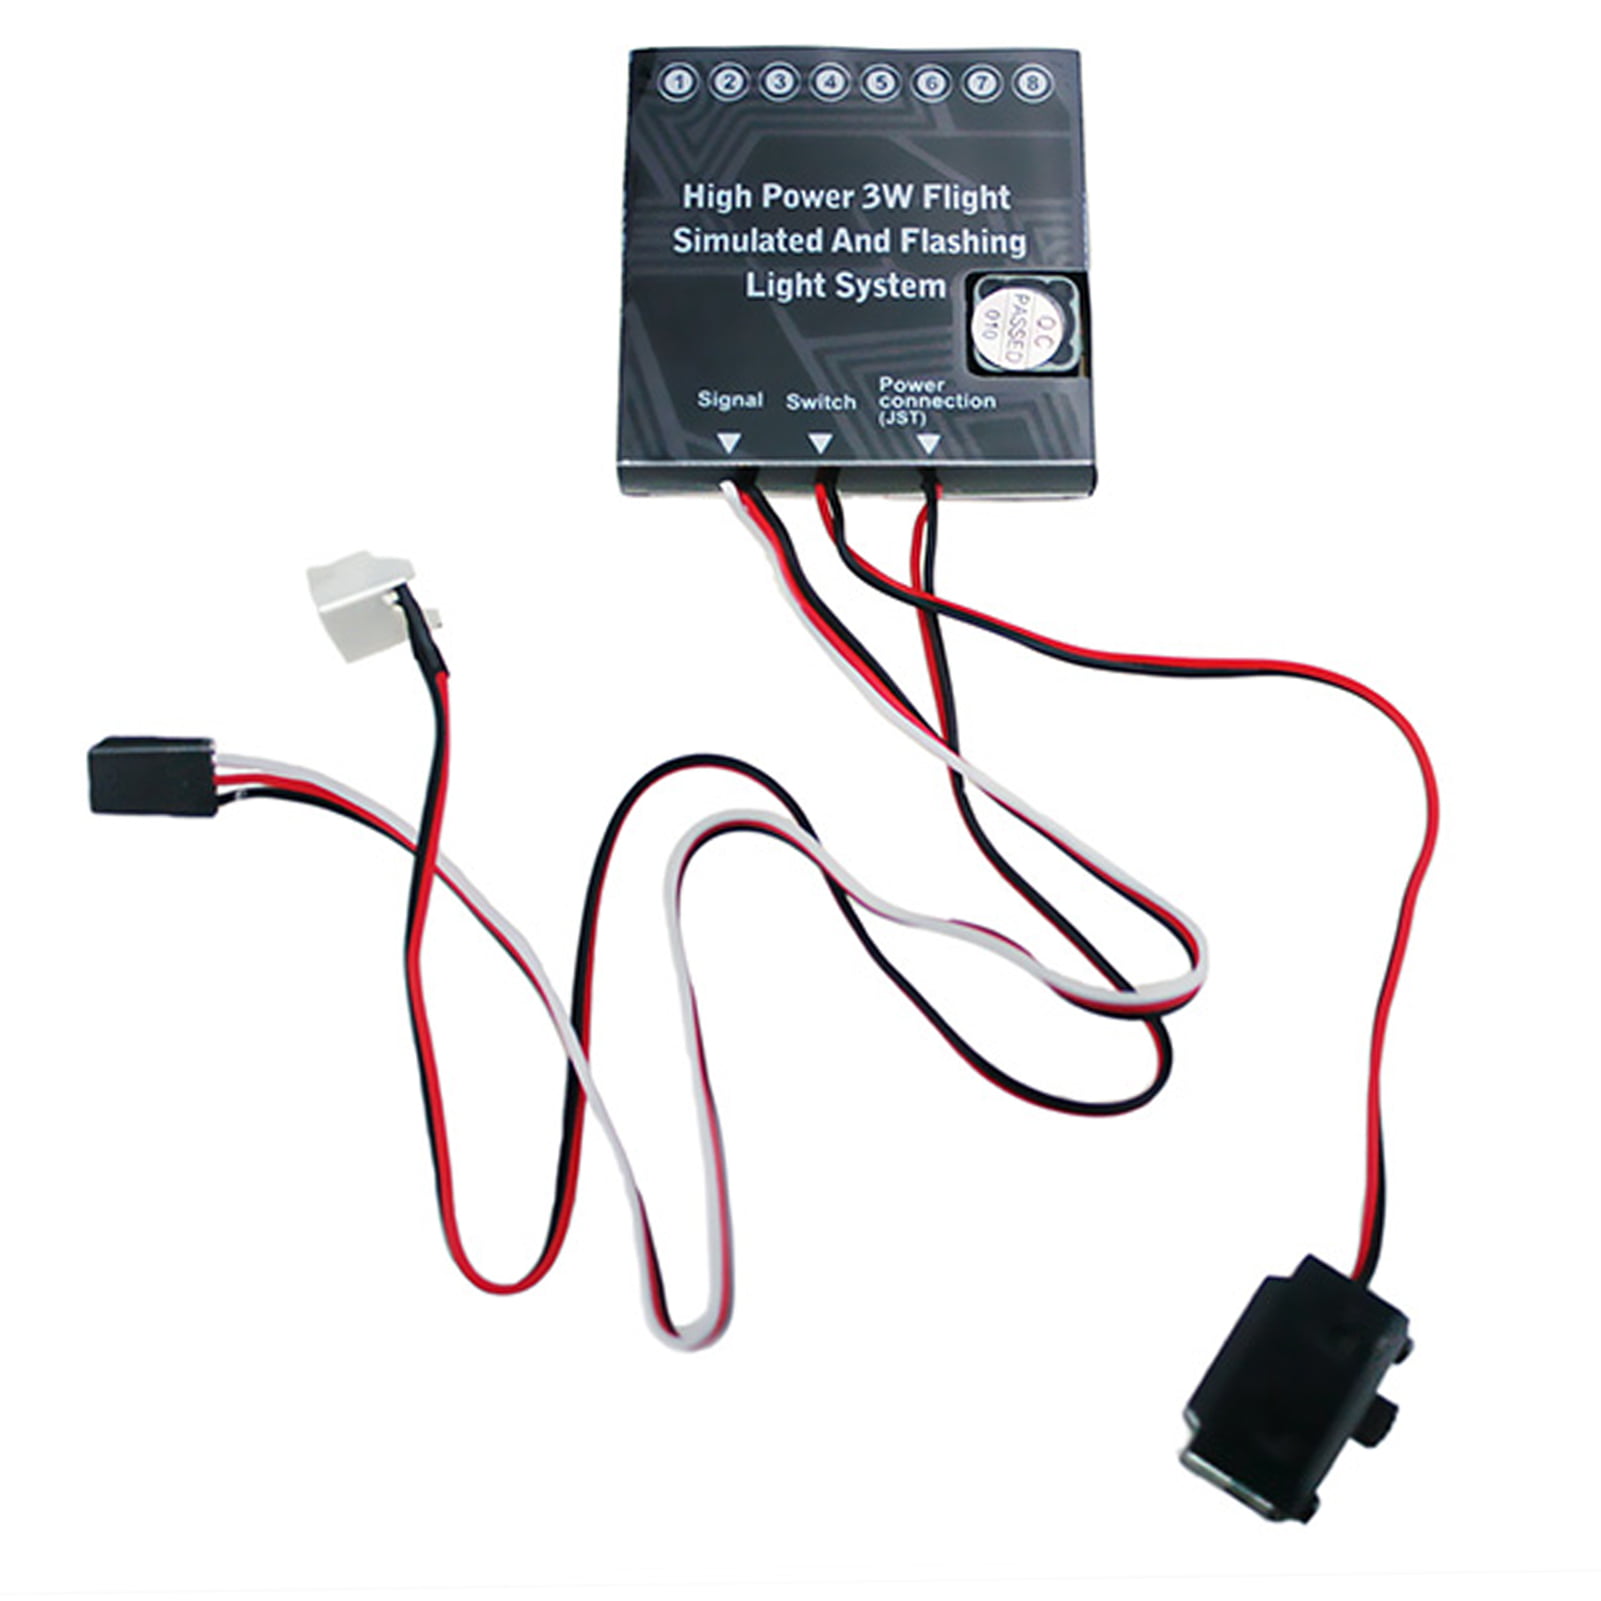 Power High Power 3W Flight Simulated And Flashing Light Free Shipping ! G.T